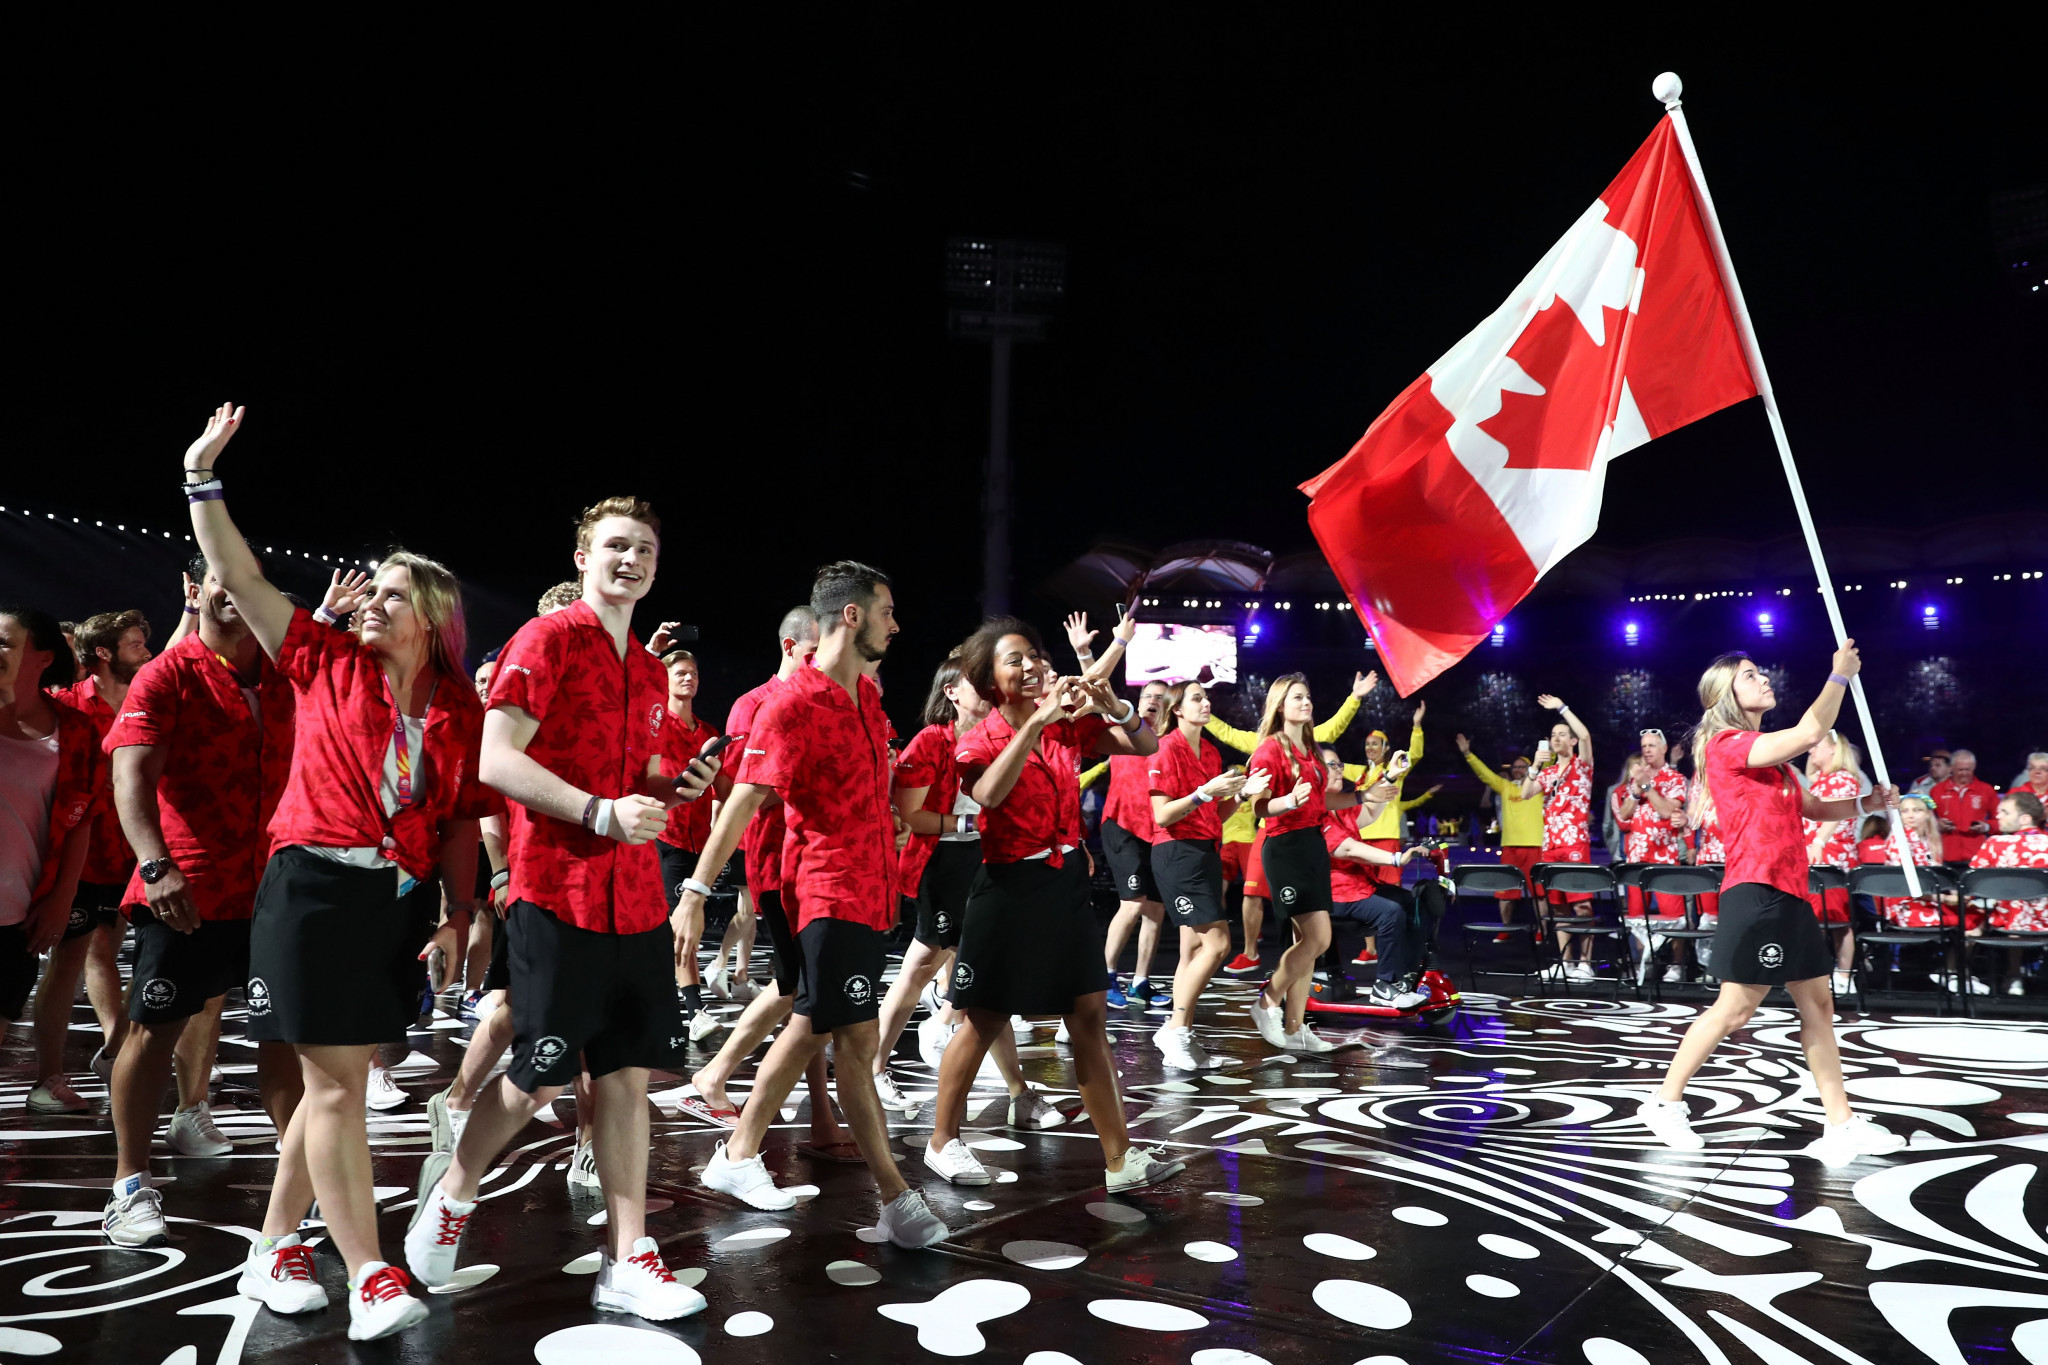 CGF welcome Canada interest as two community groups submit proposals for Commonwealth Games